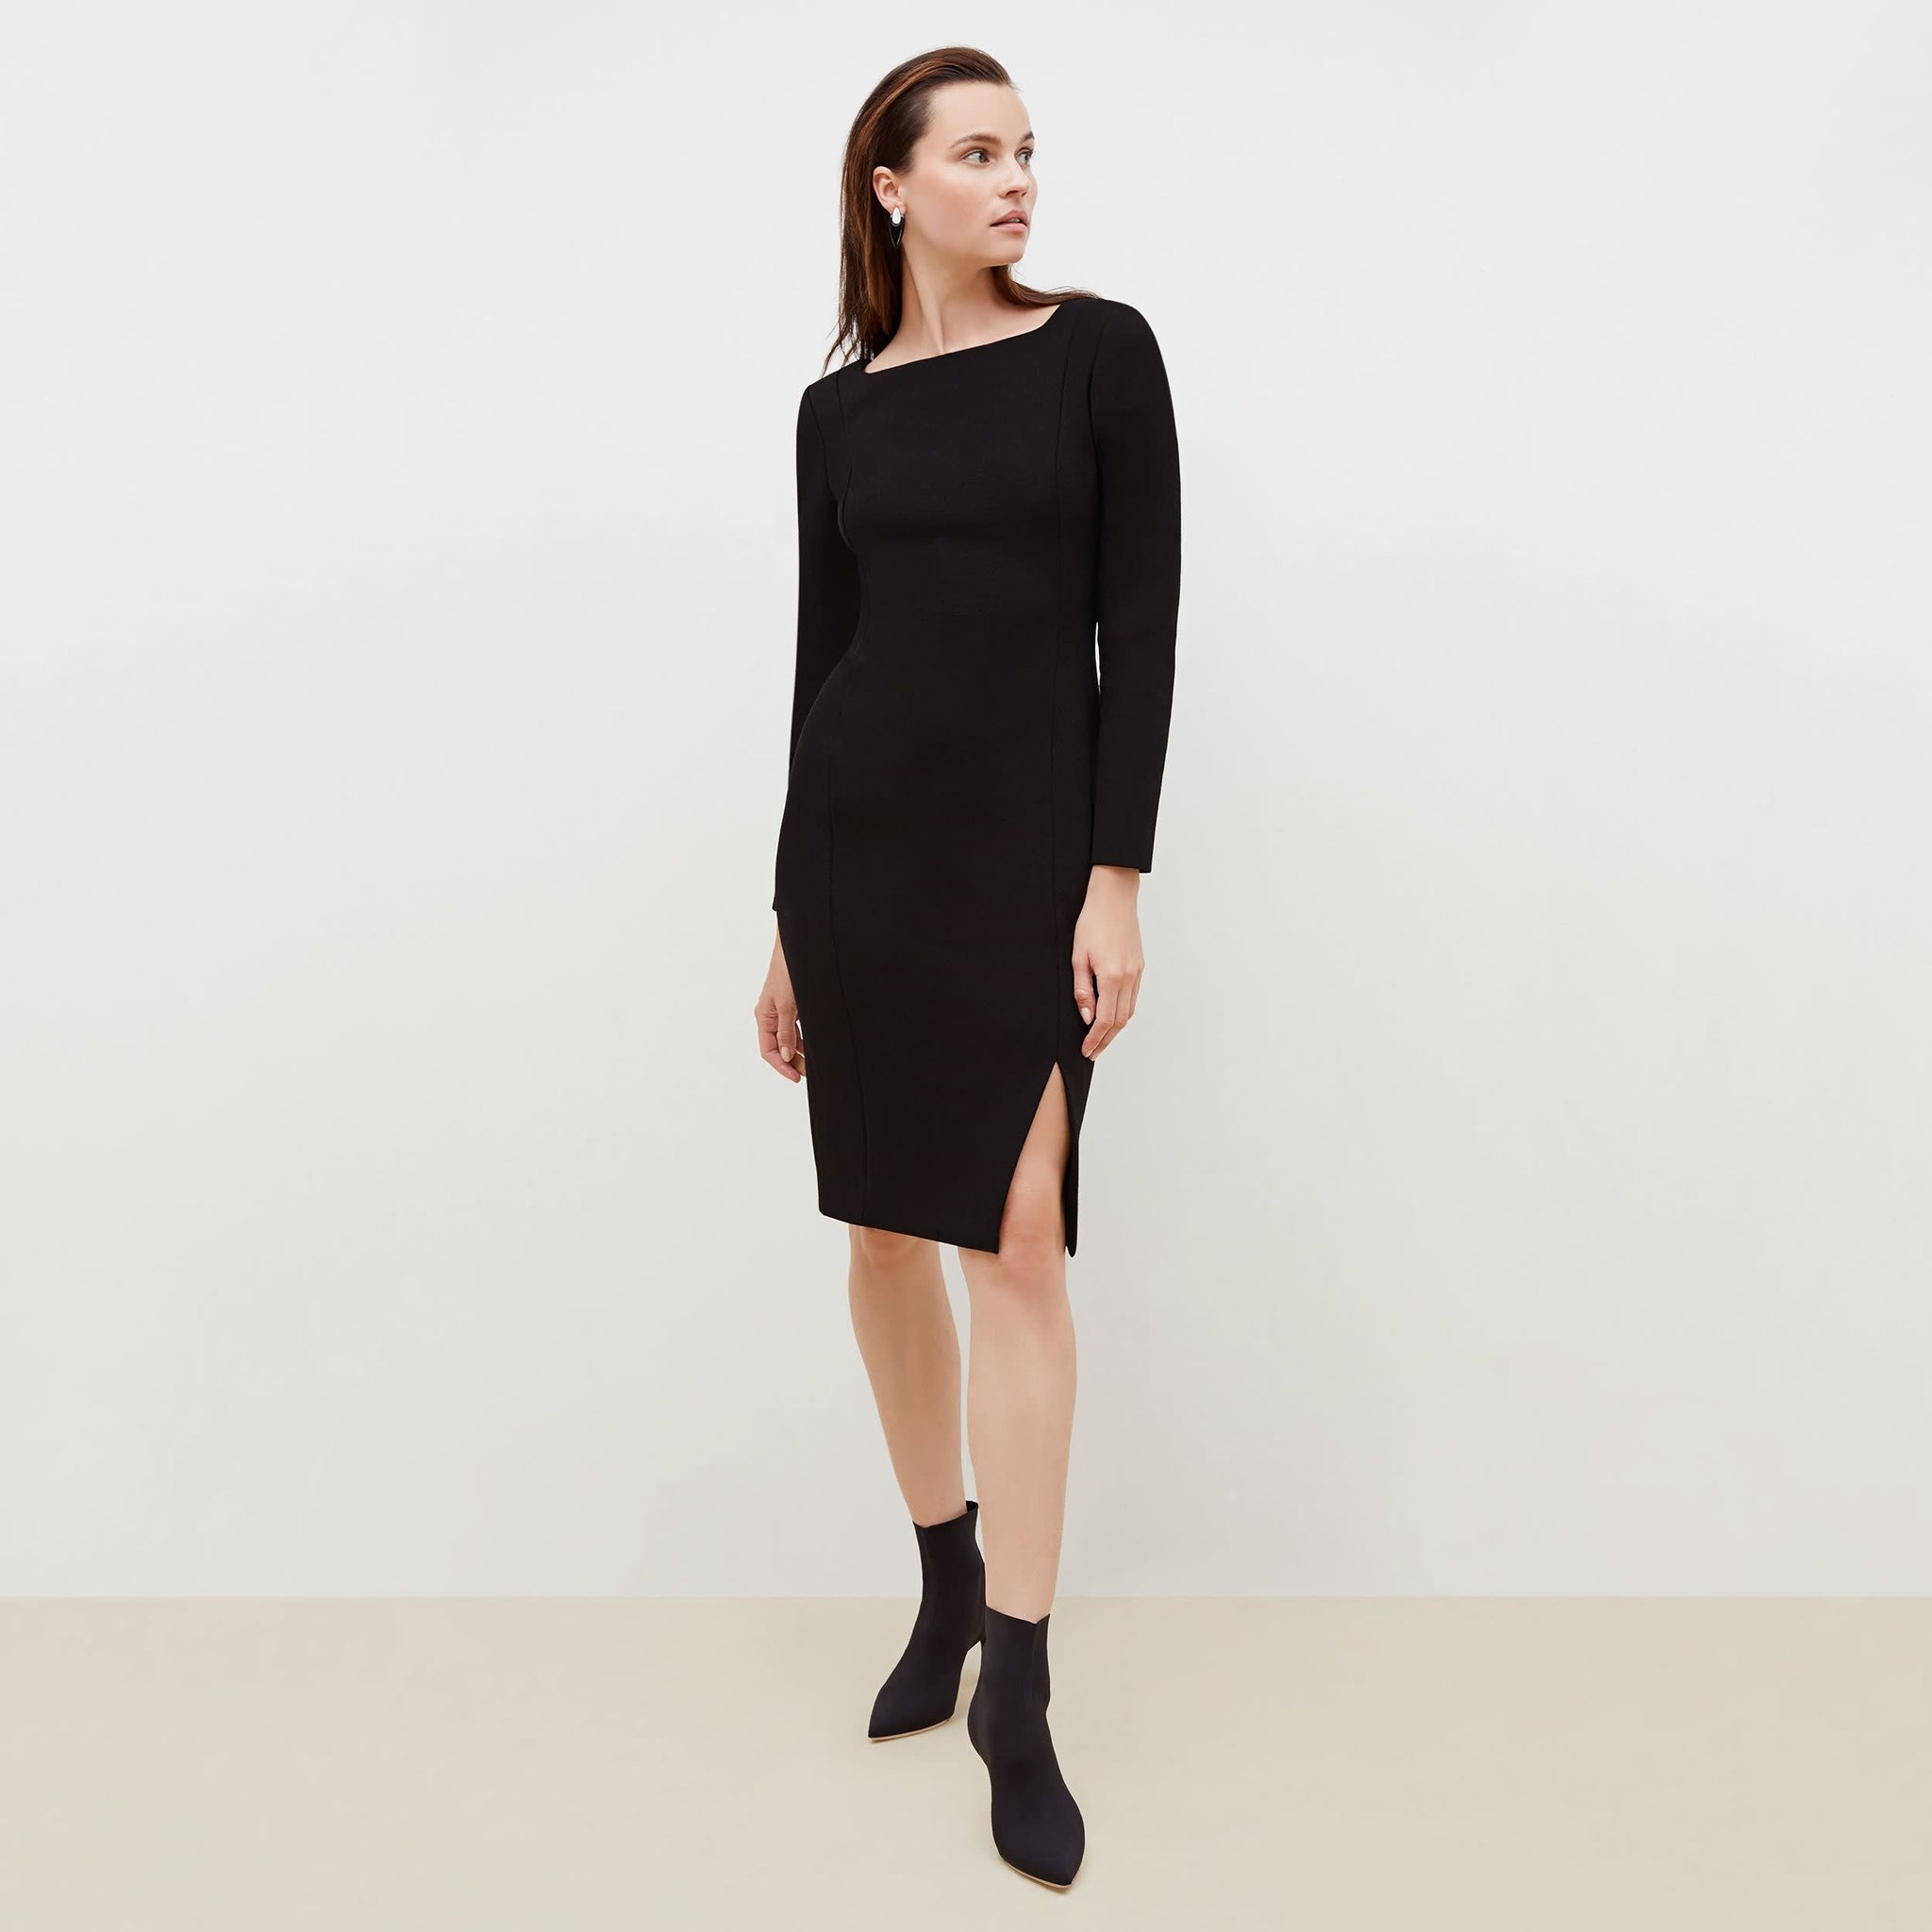 Front image of a woman standing wearing the Joanna Dress-Worth in Black